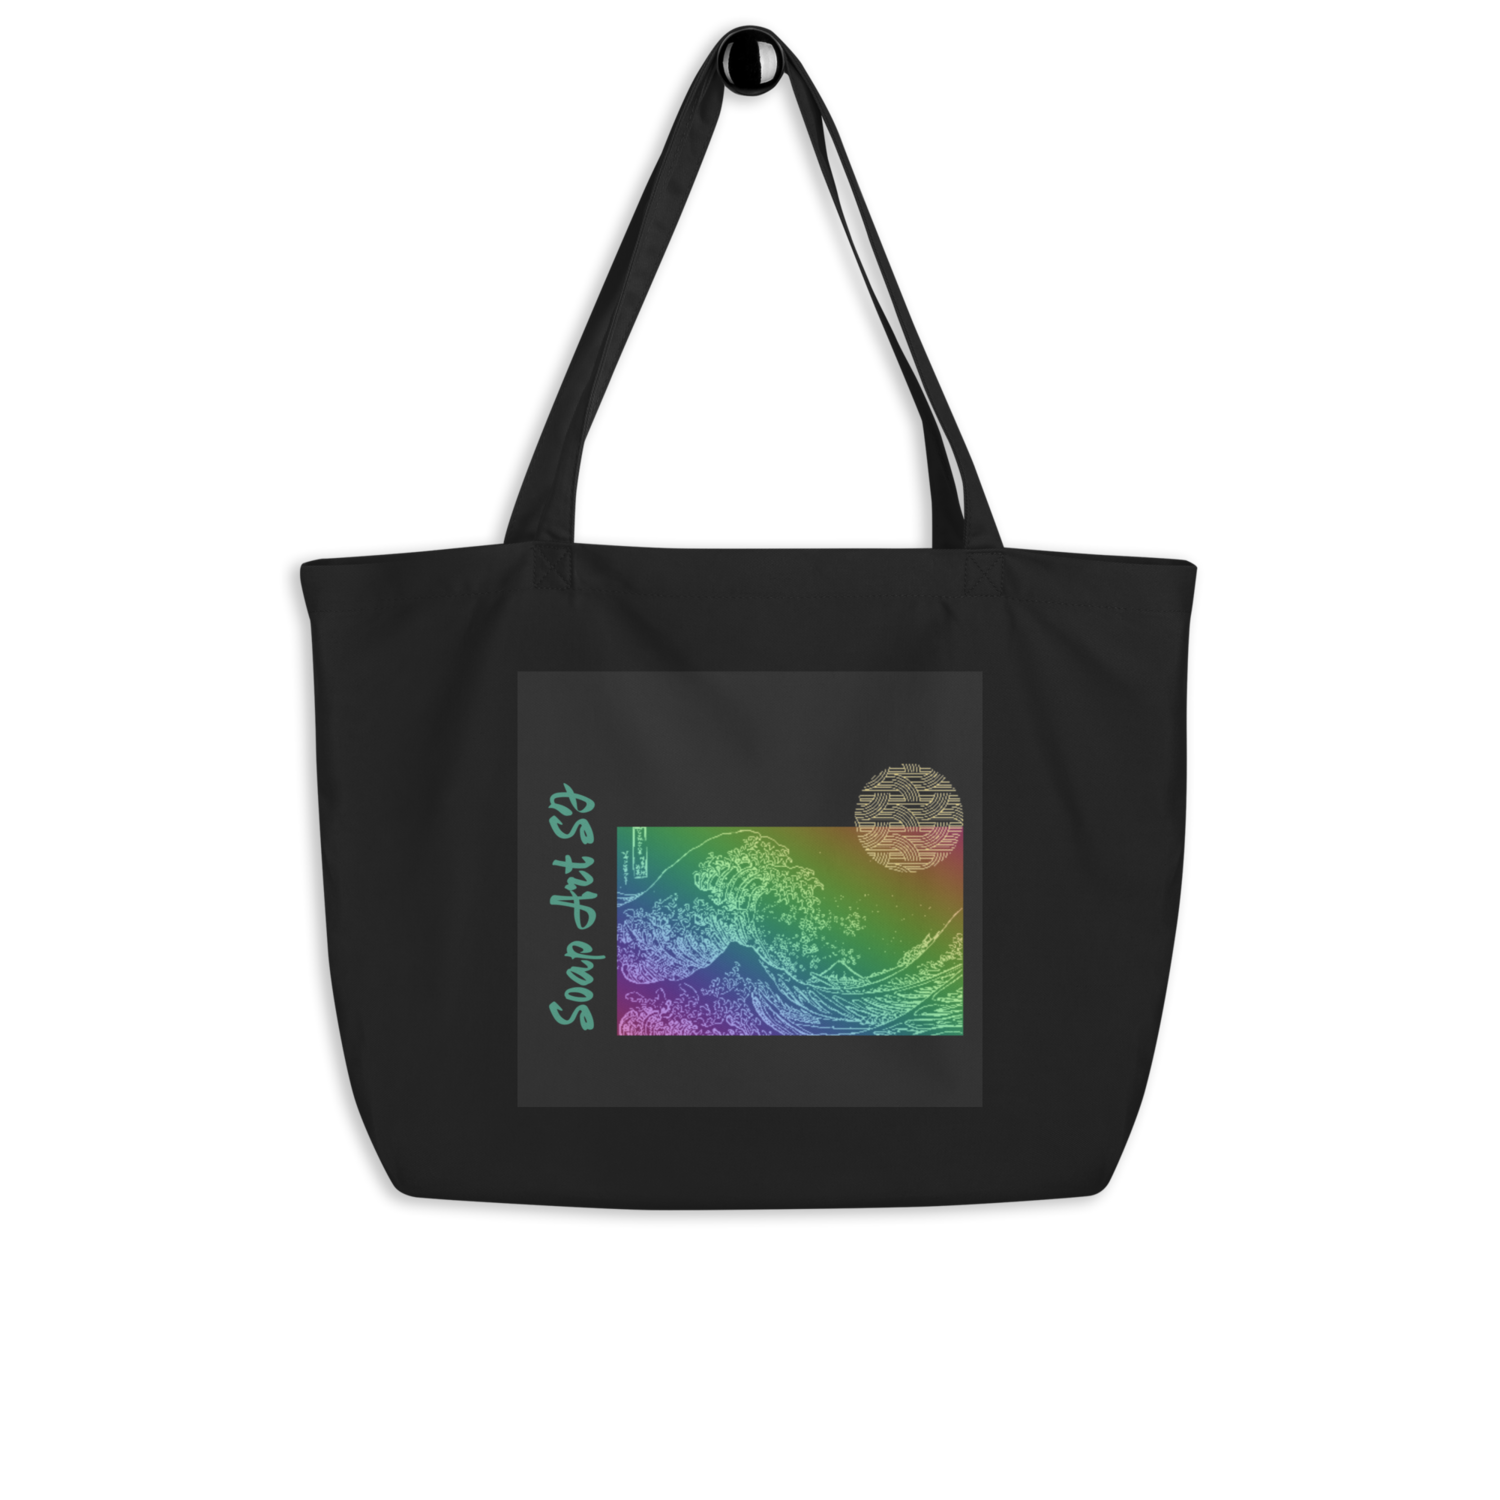 Tote Bag, Organic Cotton Large, Designed by SoapArtSF